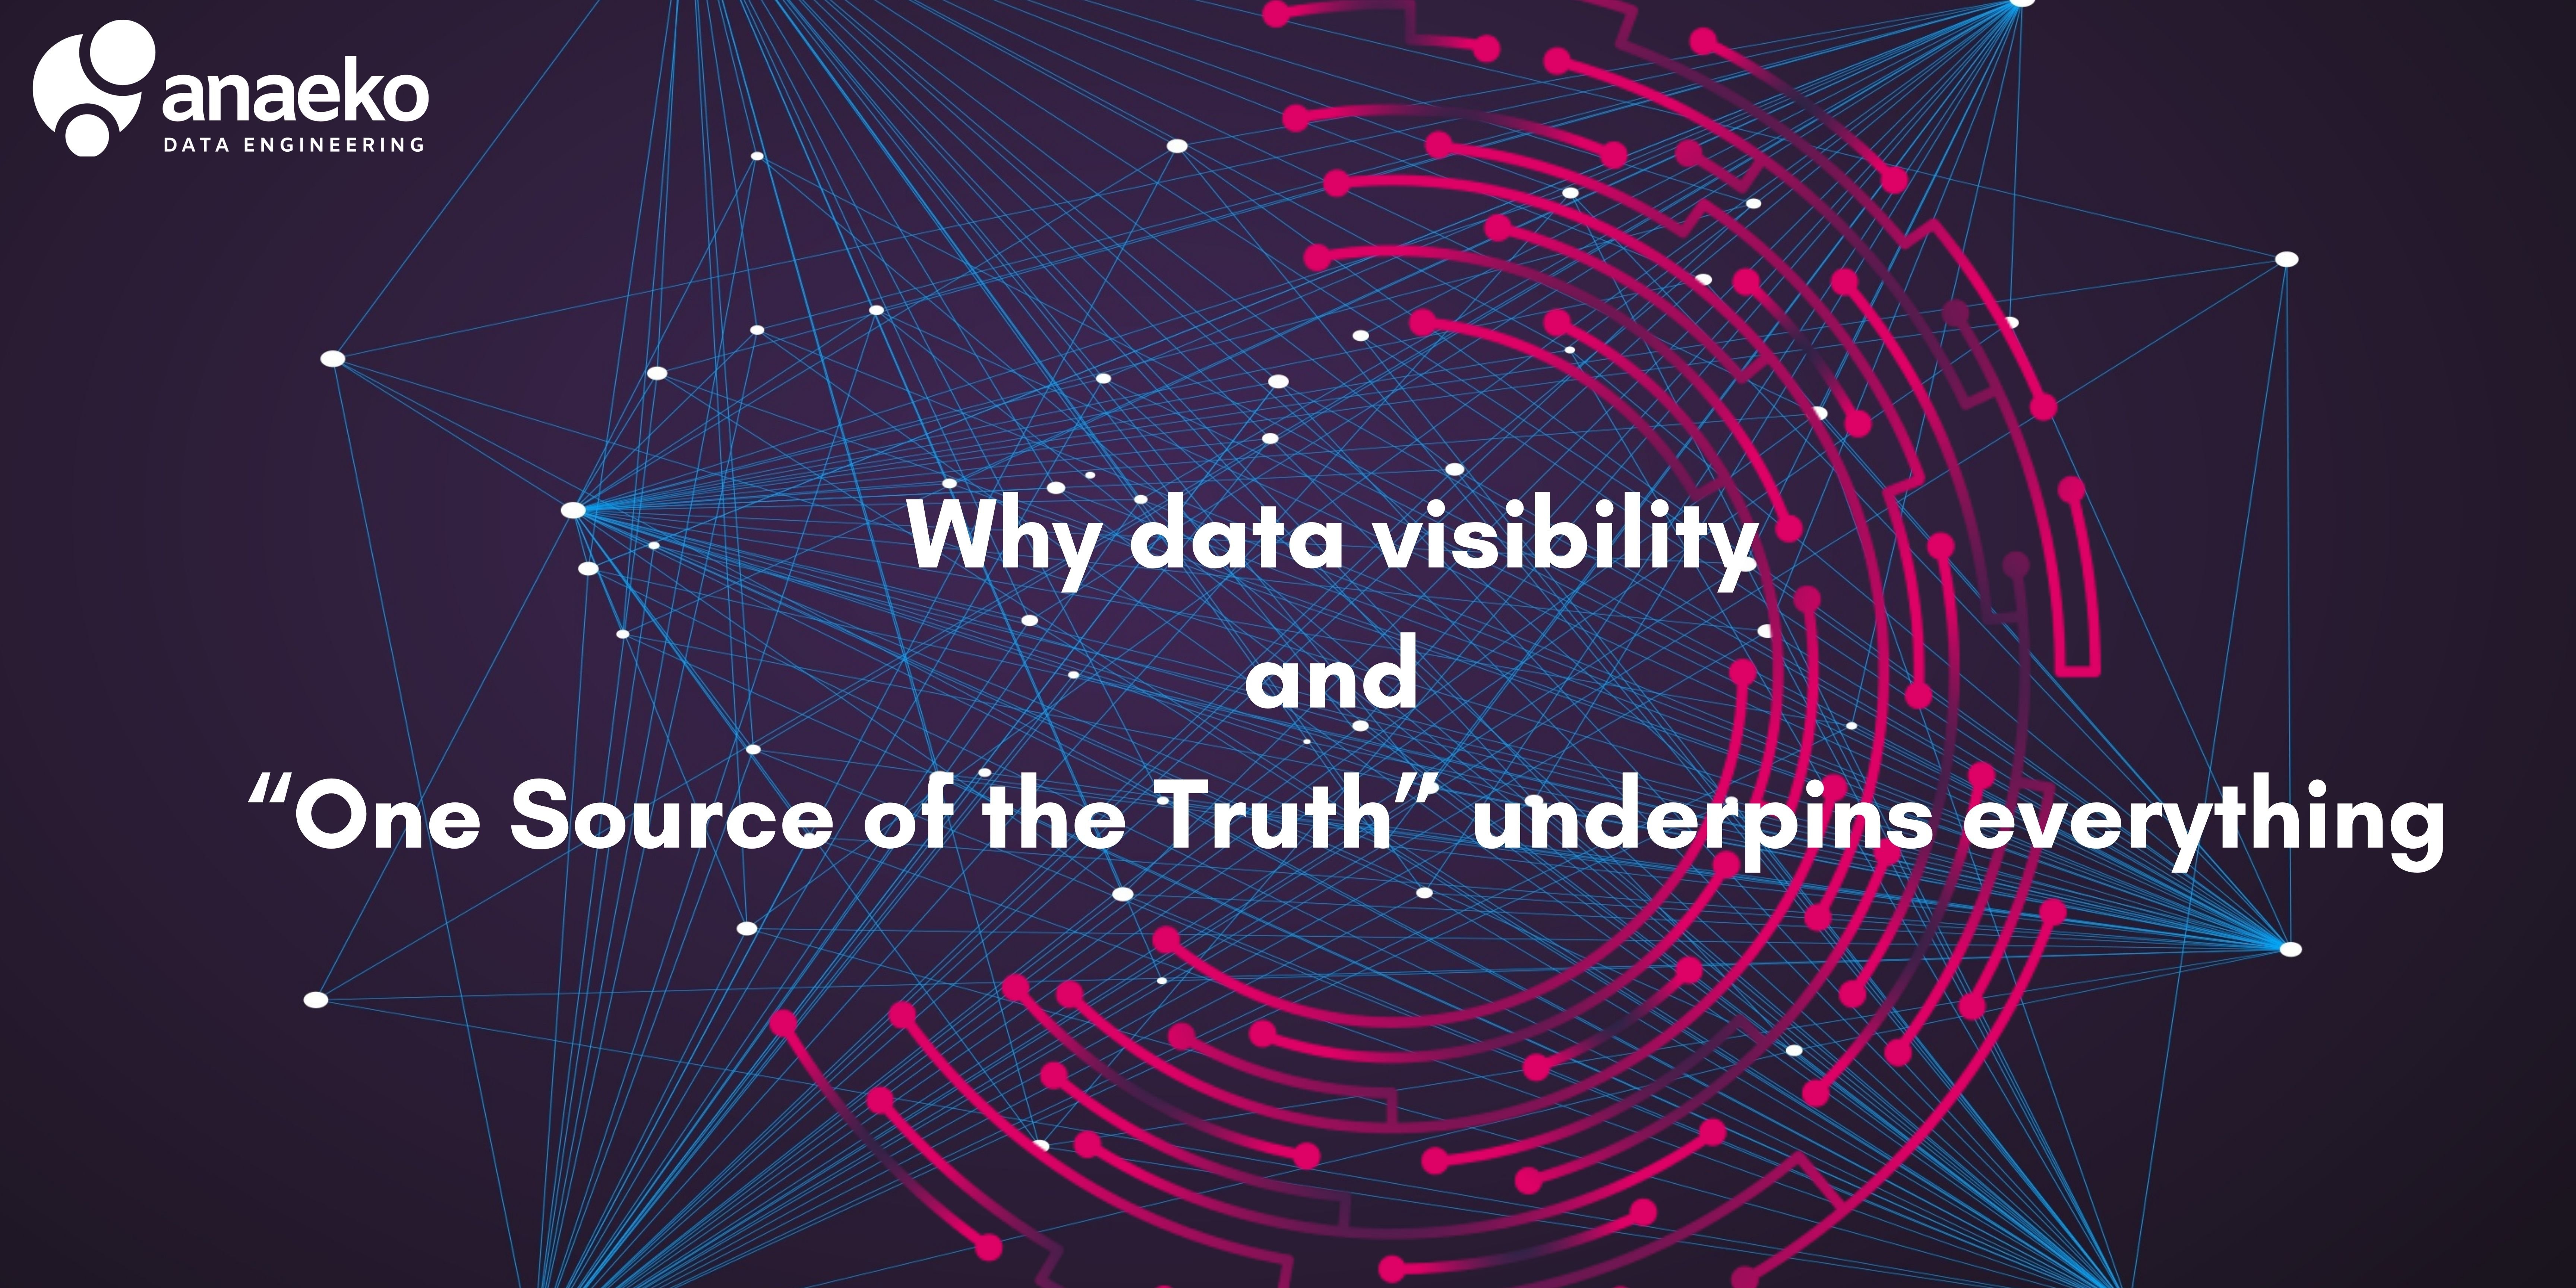 Why data visibility and “One Source of the Truth” underpins everything